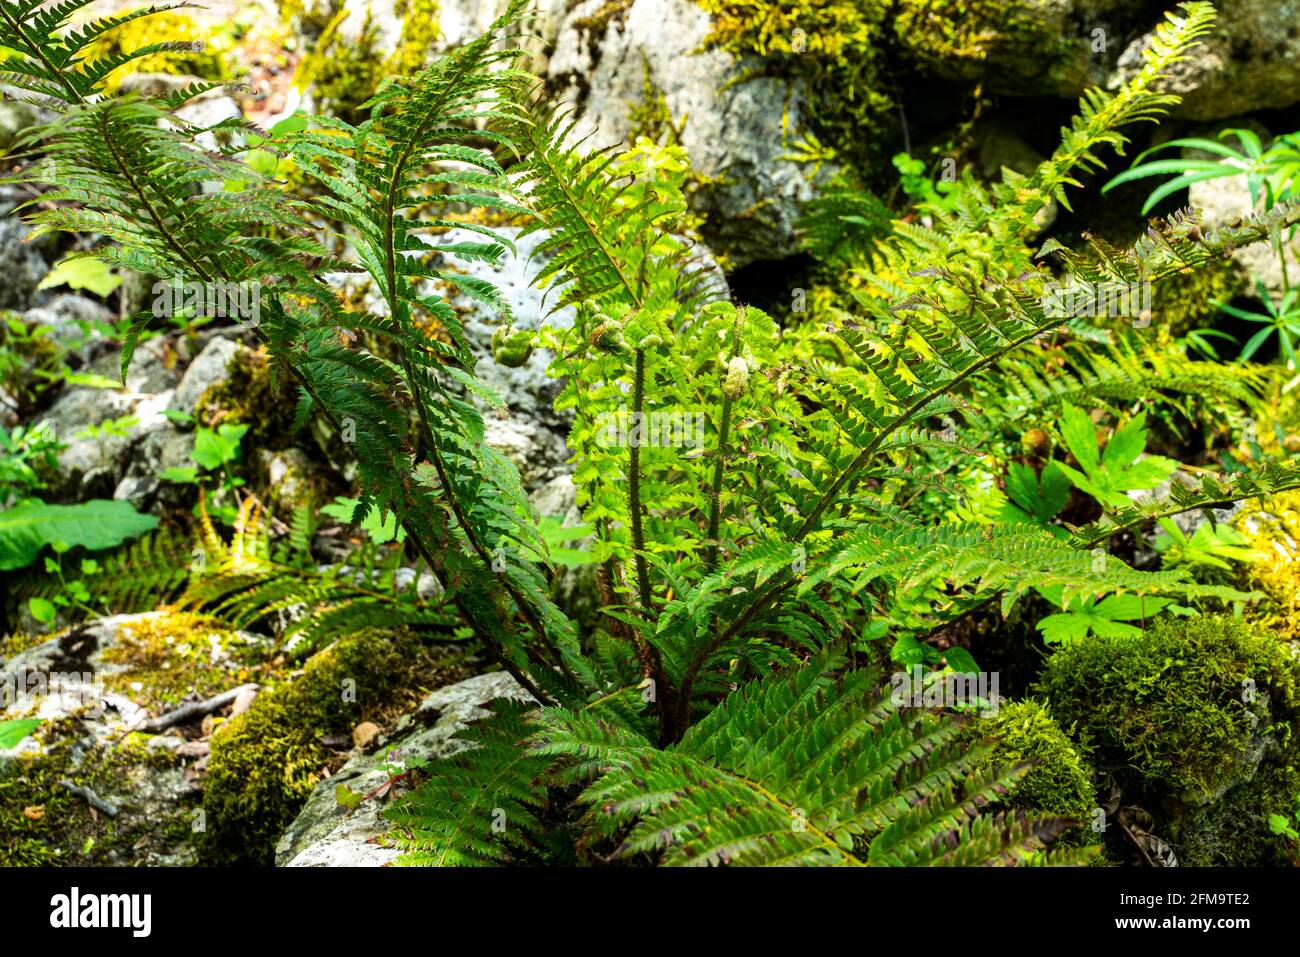 Male fern, Dryopteris filix-mas, is a plant belonging to the Dryopteridaceae family. It is one of the most common ferns in shady woods. Abruzzo, Italy Stock Photo